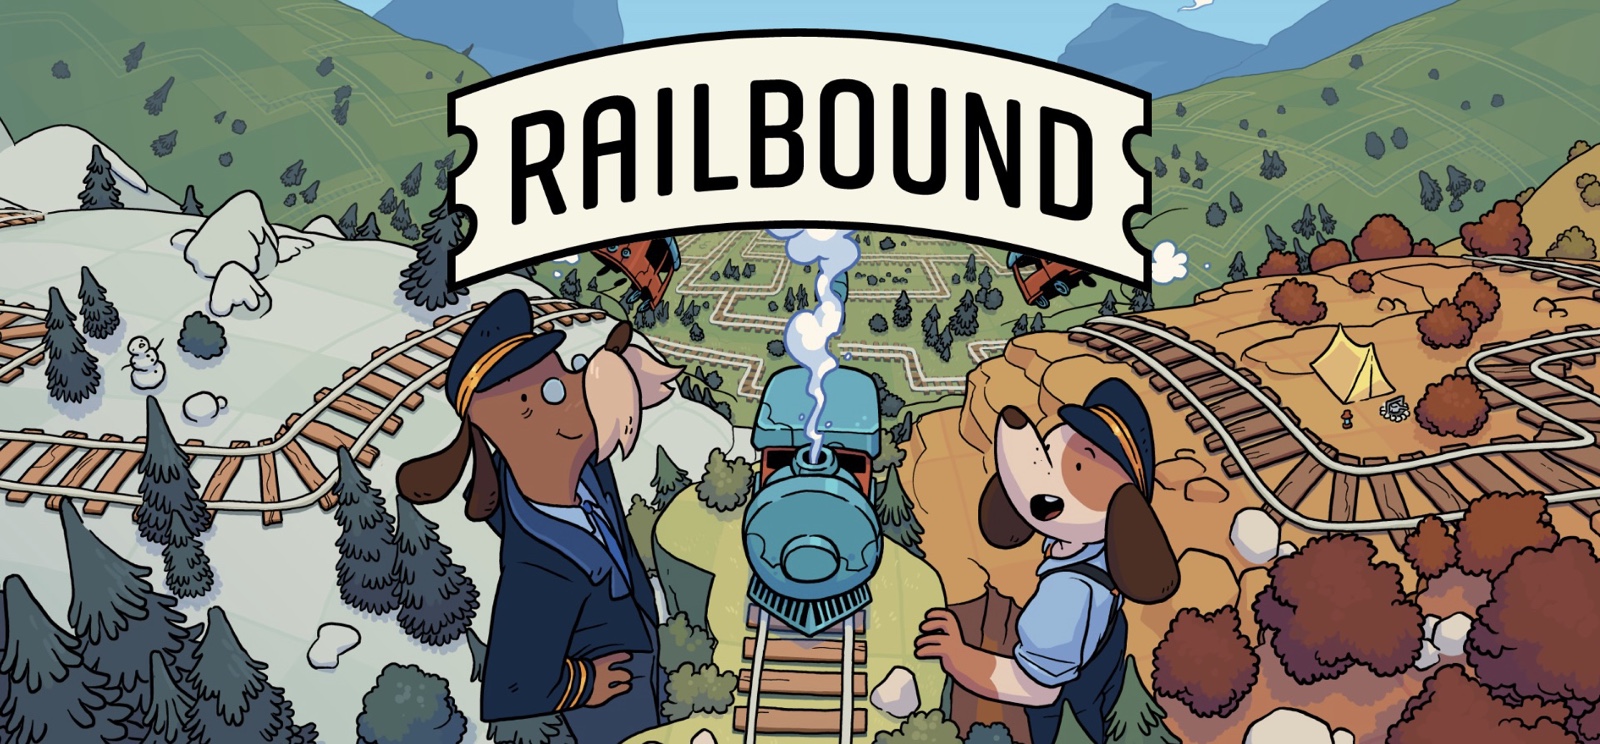 Read more about the article Railbound: Walkthrough Guide